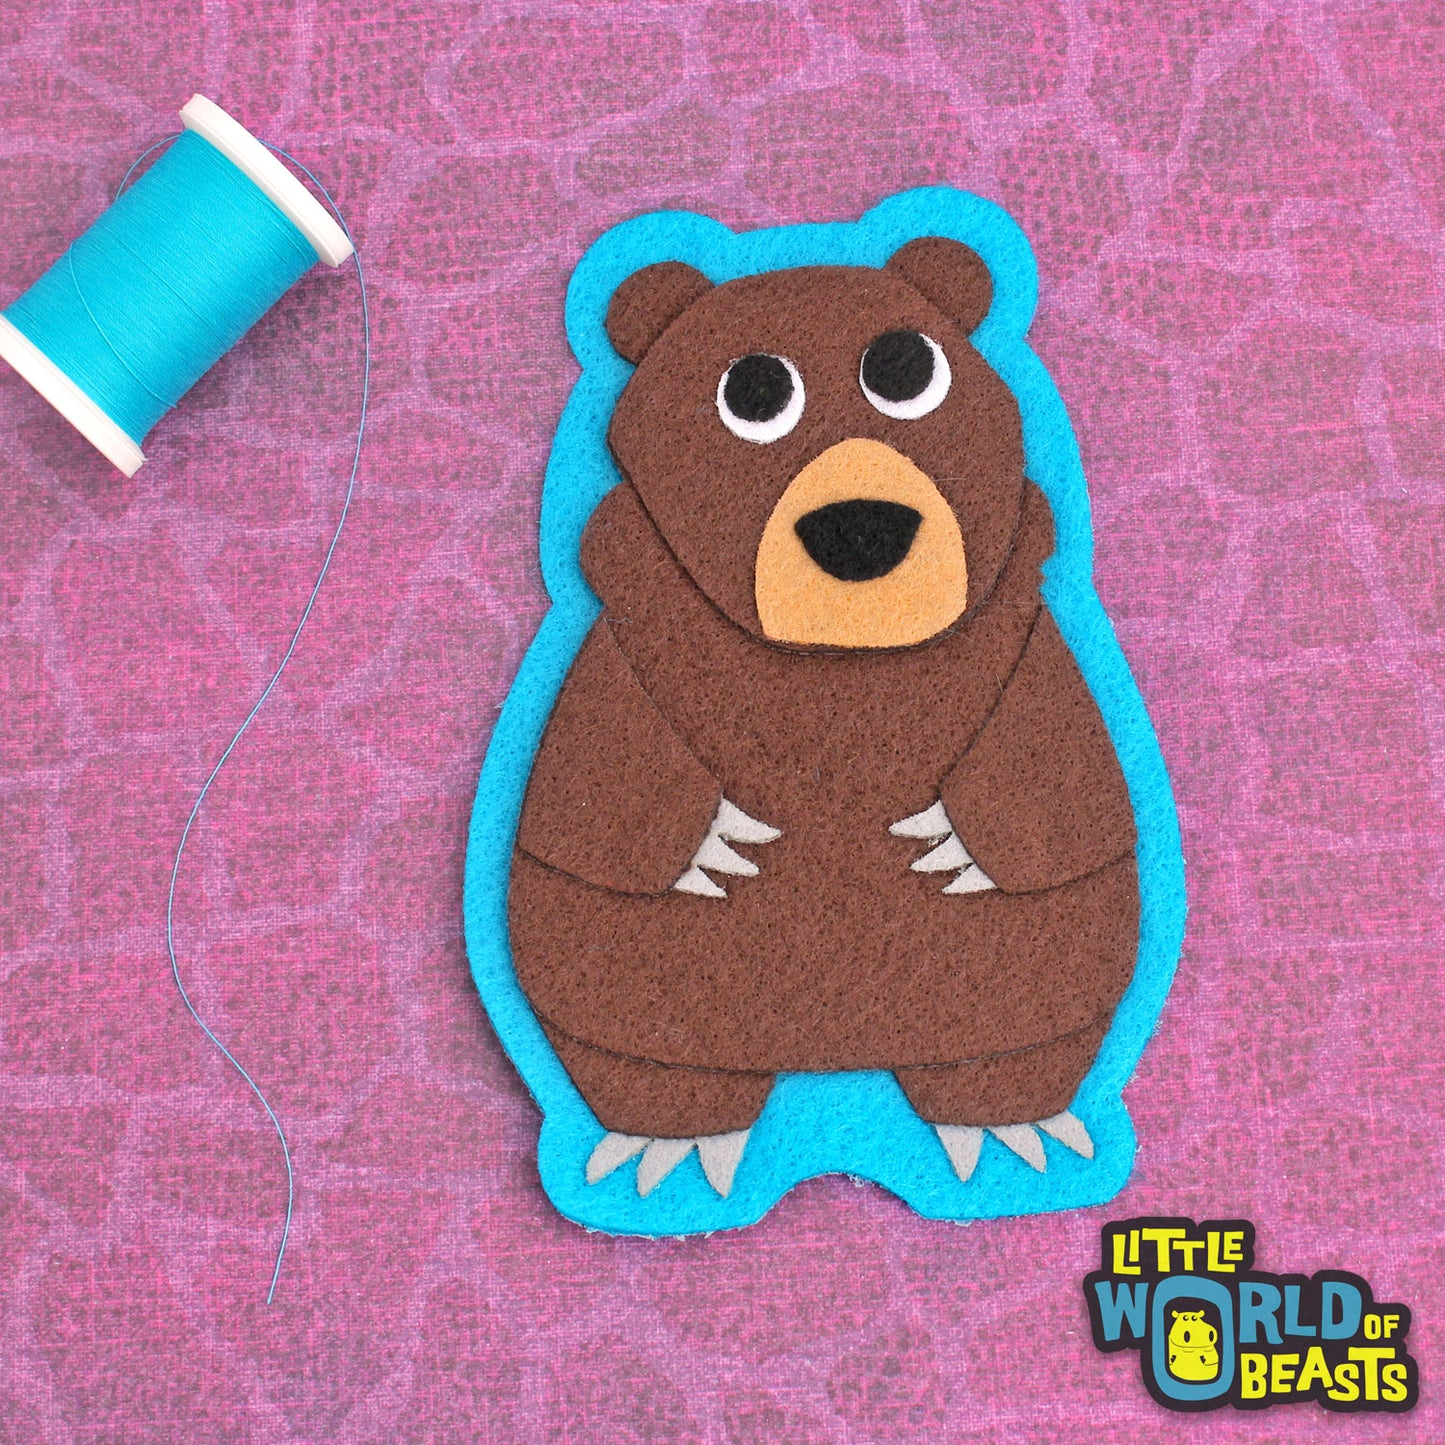 Felt Bear - Sew on or Iron on Patch - Little World of Beasts